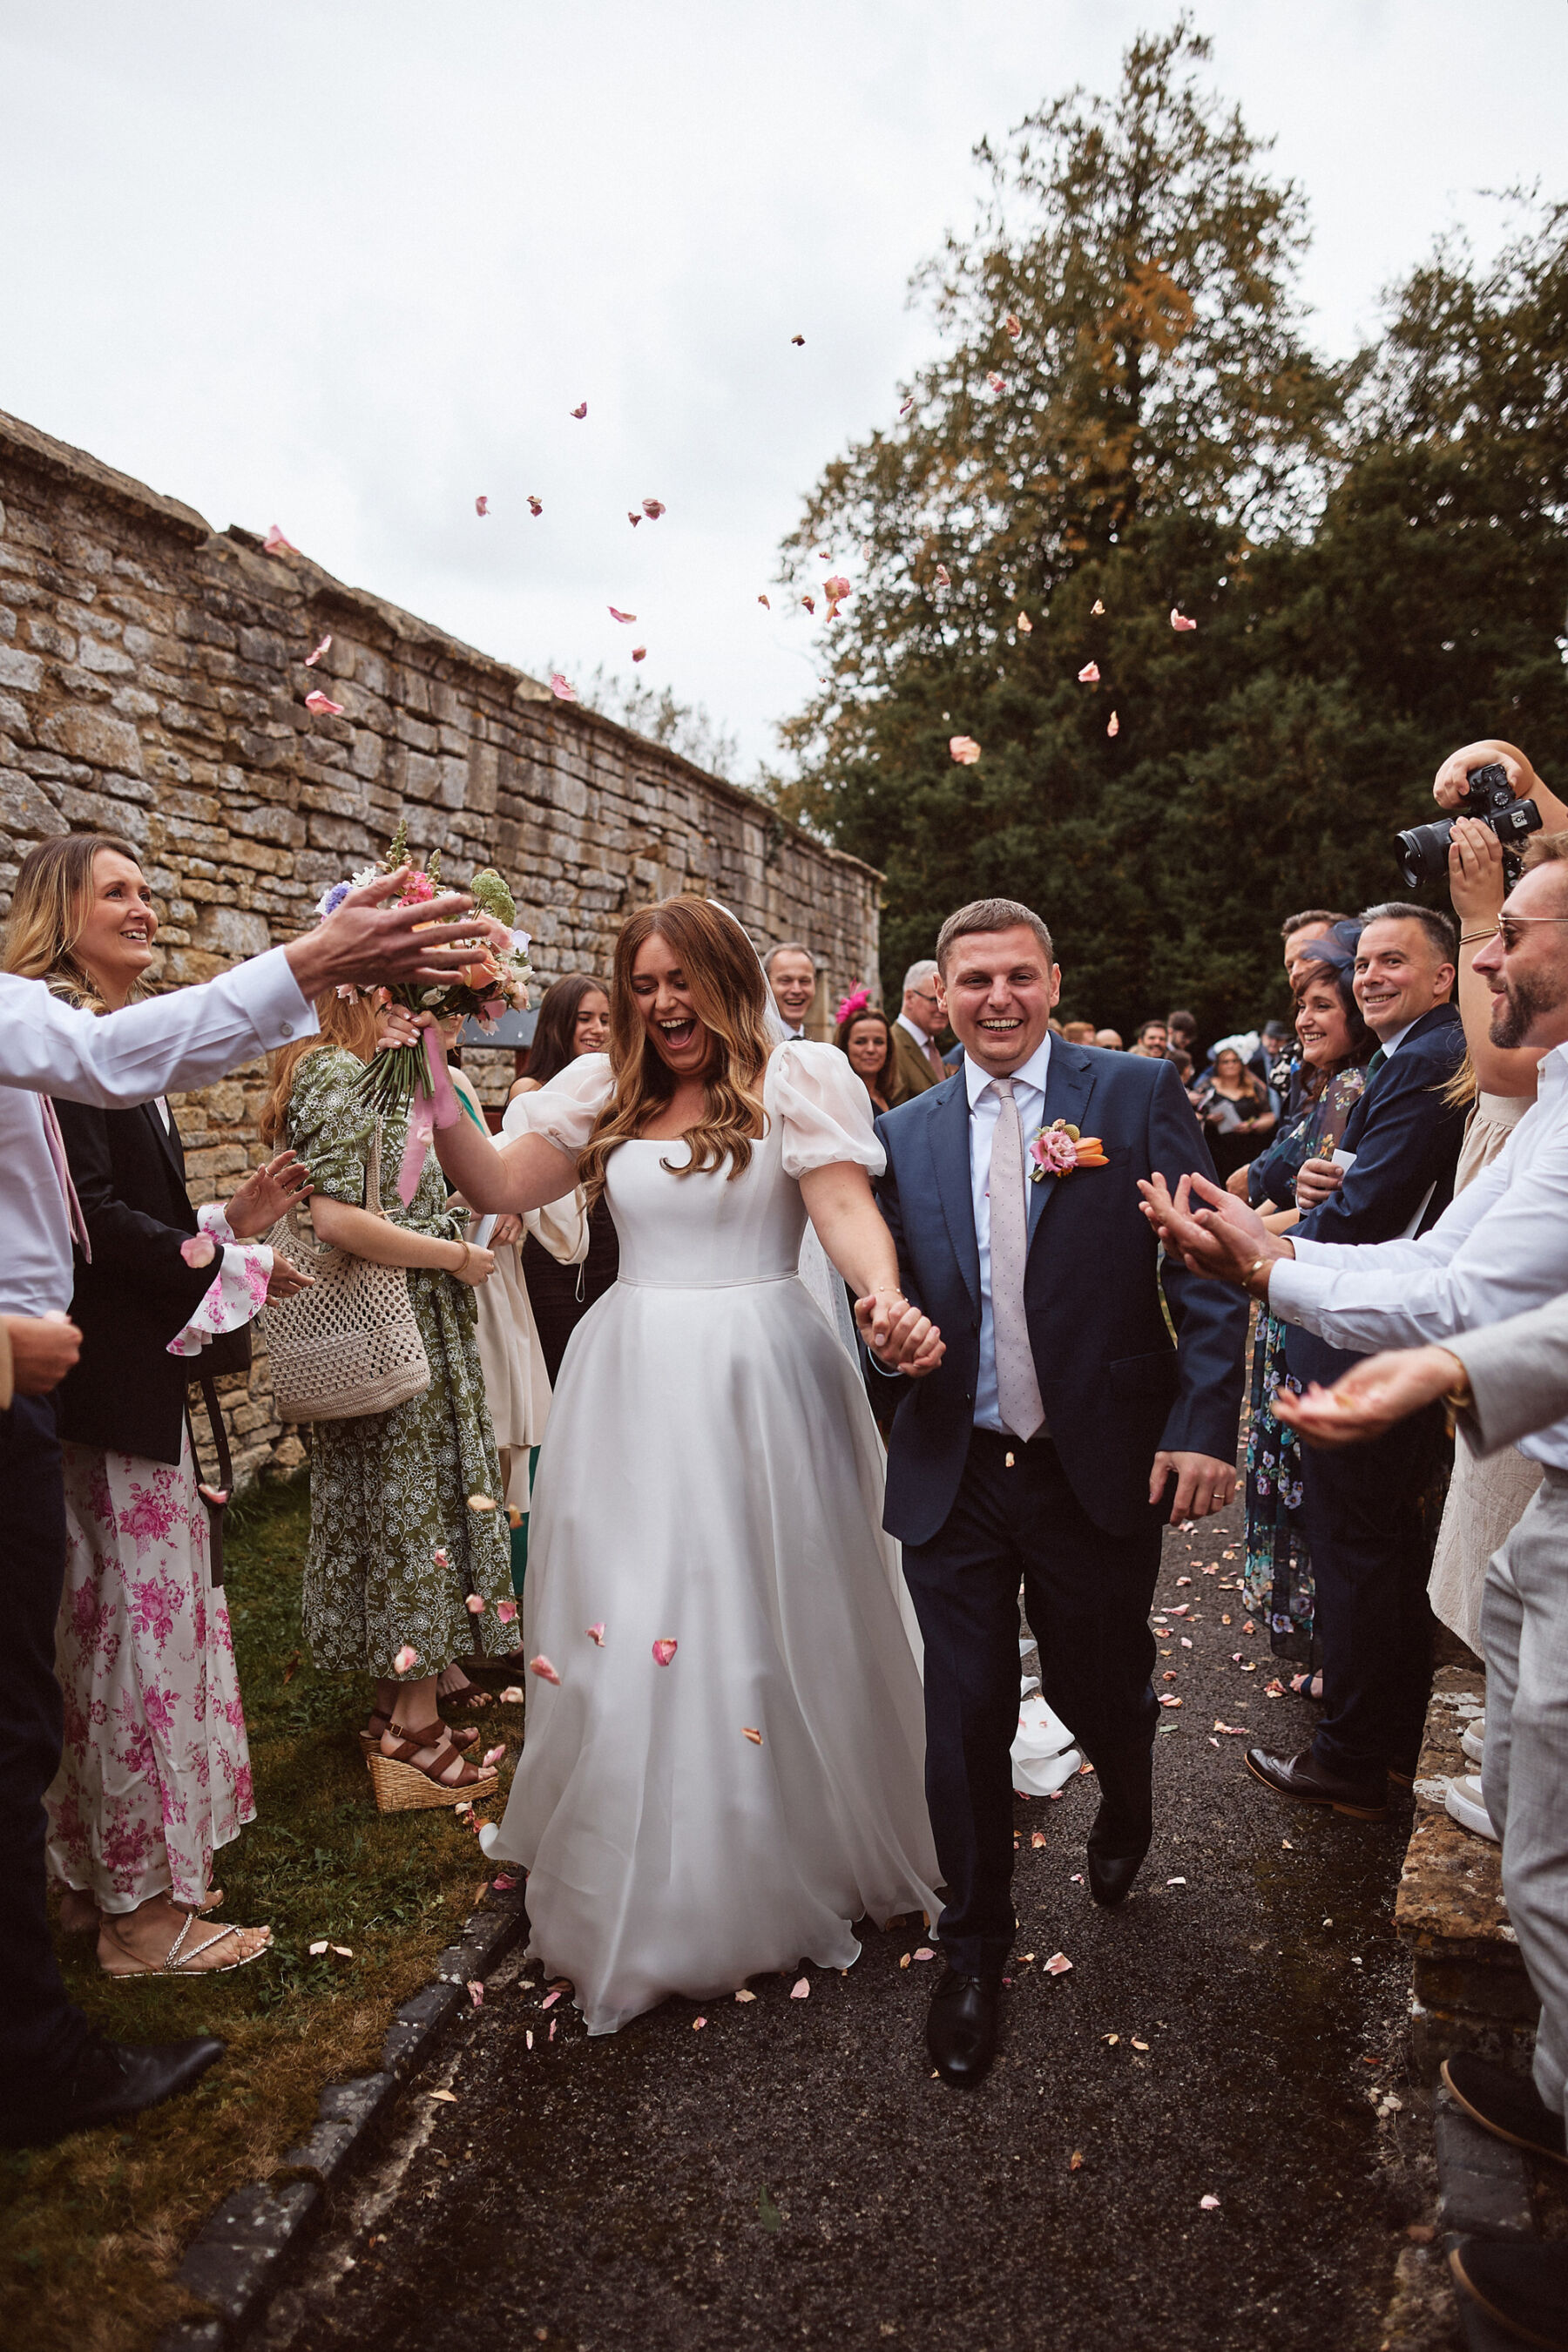 Bride and groom exiting in a flurry of confetti. The bride wears a puff sleeve Suzanne Neville wedding dress from Miss Bush Bridal boutique.